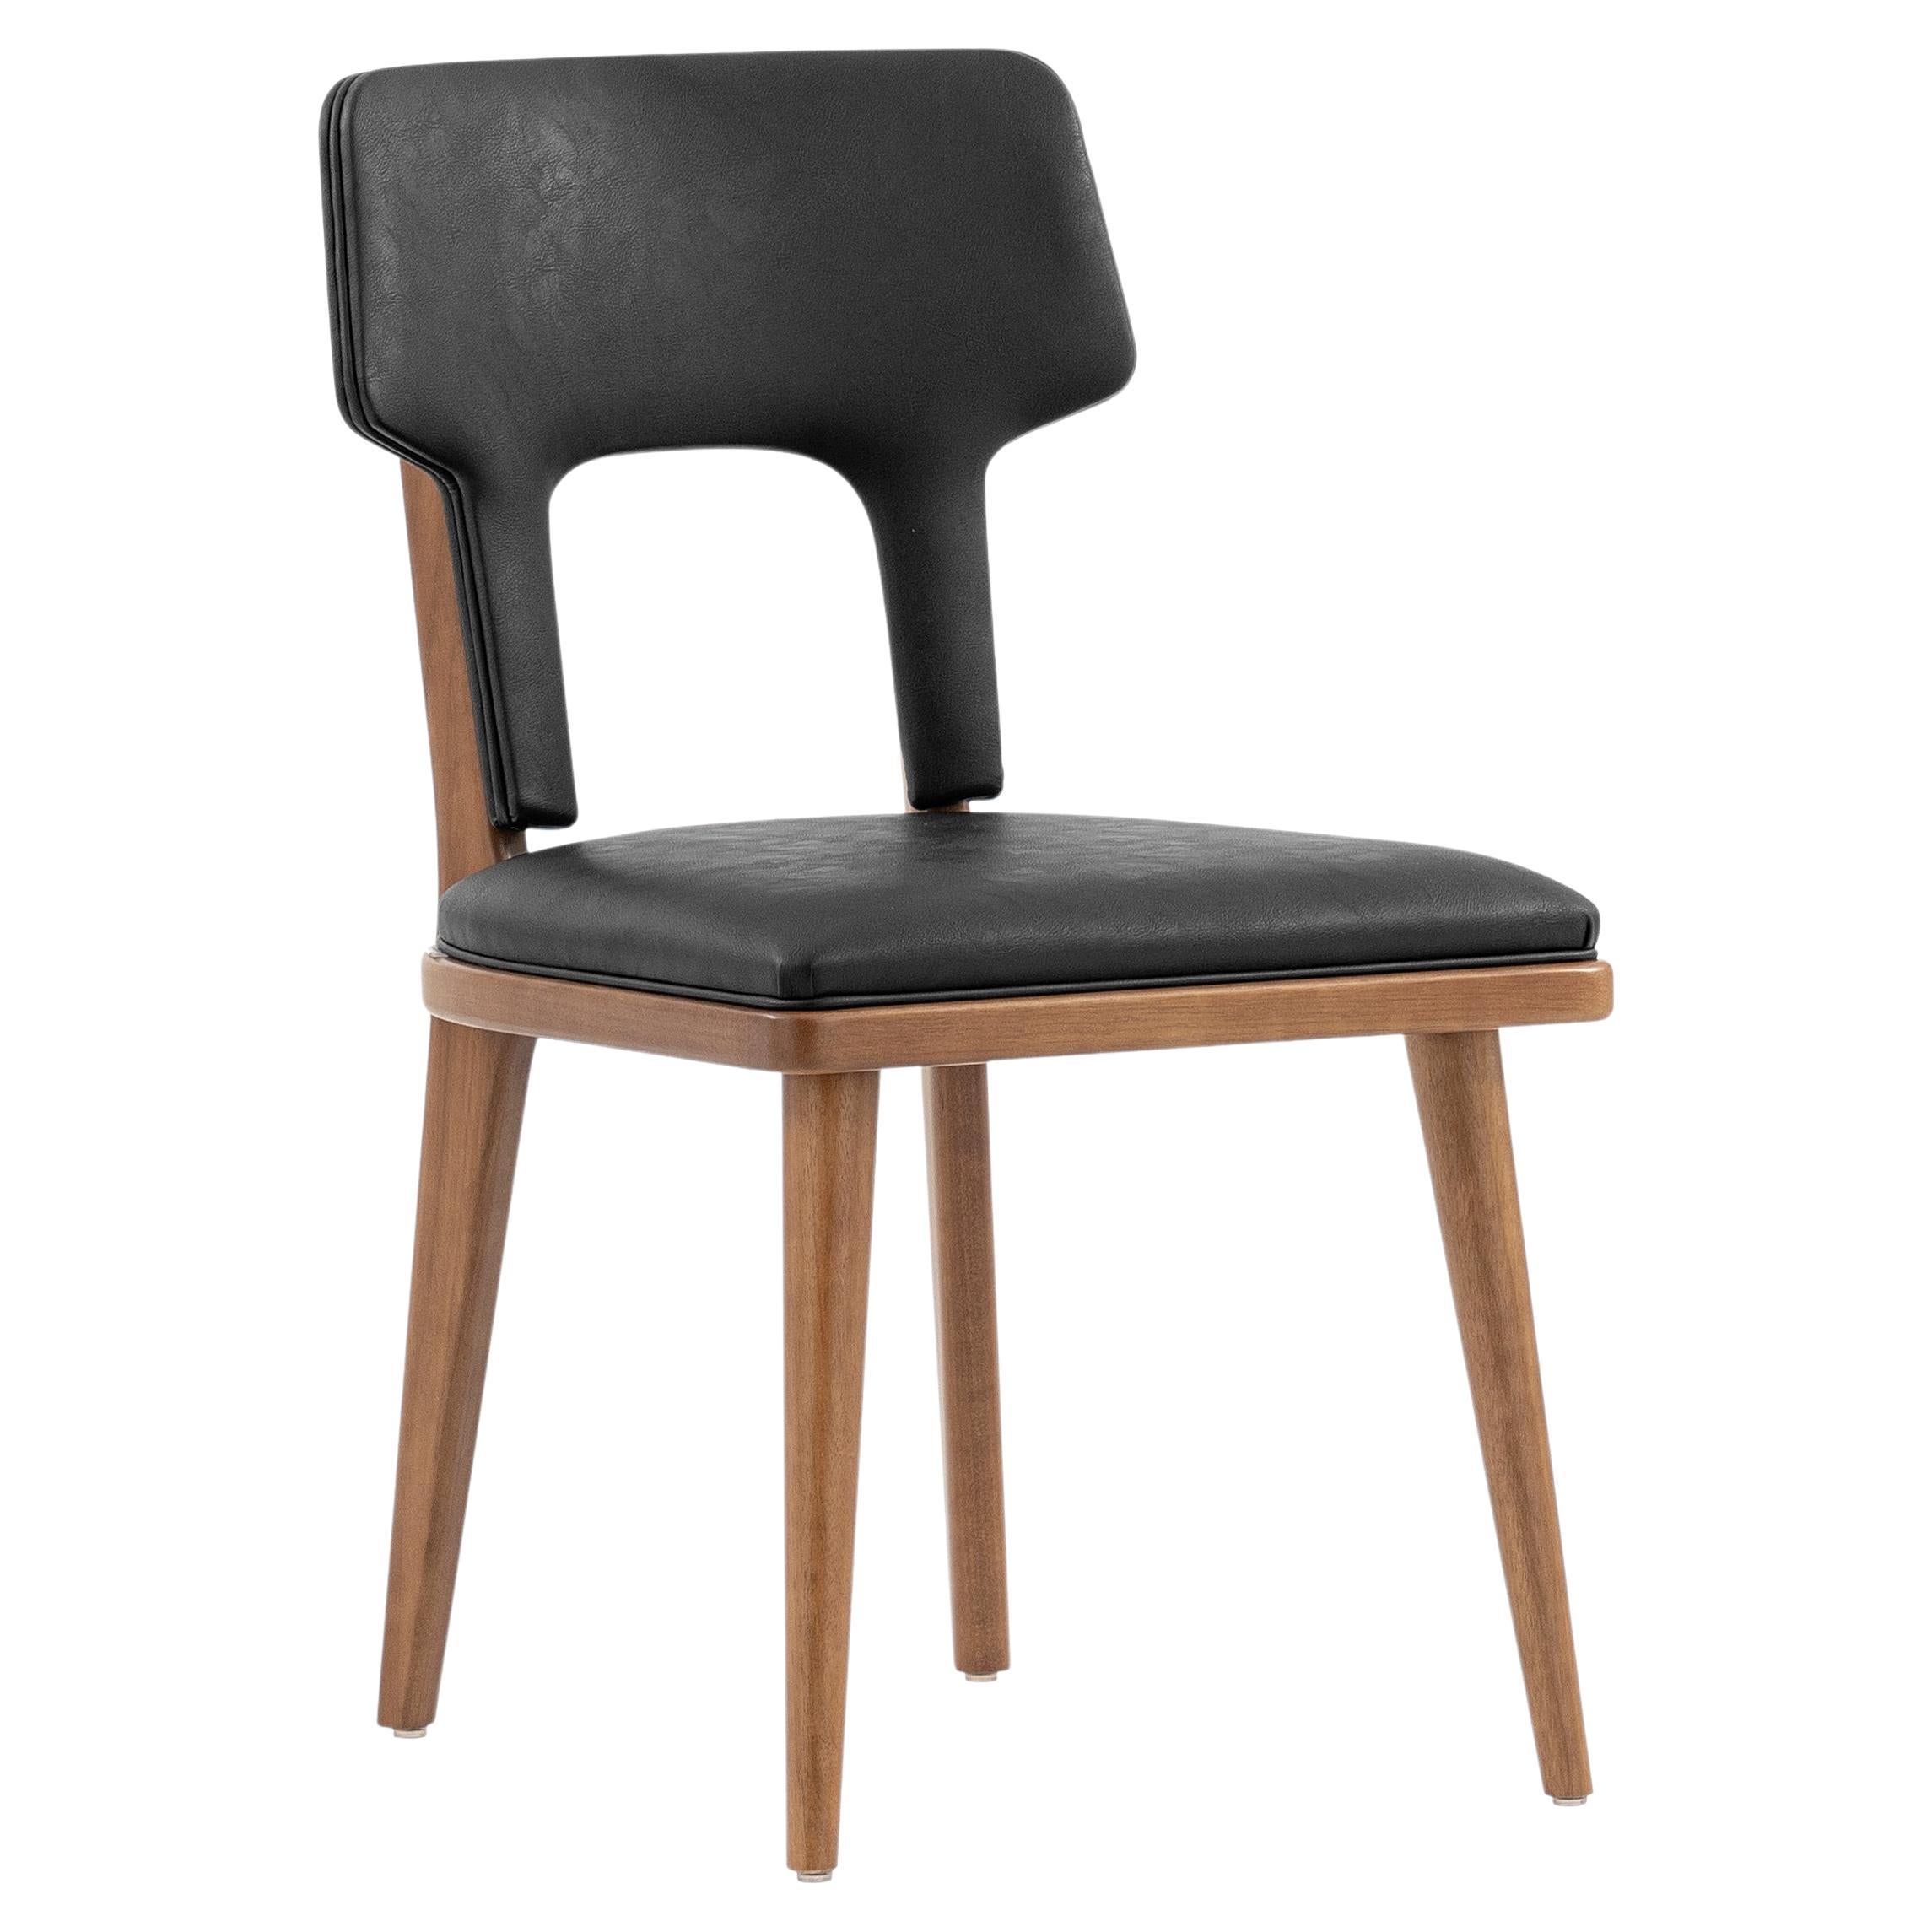 The Fork dining chair has been made by our Uultis team with black fabric and an oak wood Uultis finish for the legs. Our amazing team at Uultis has thought of every little detail so this dining chair is perfect and comfortable as well as traditional